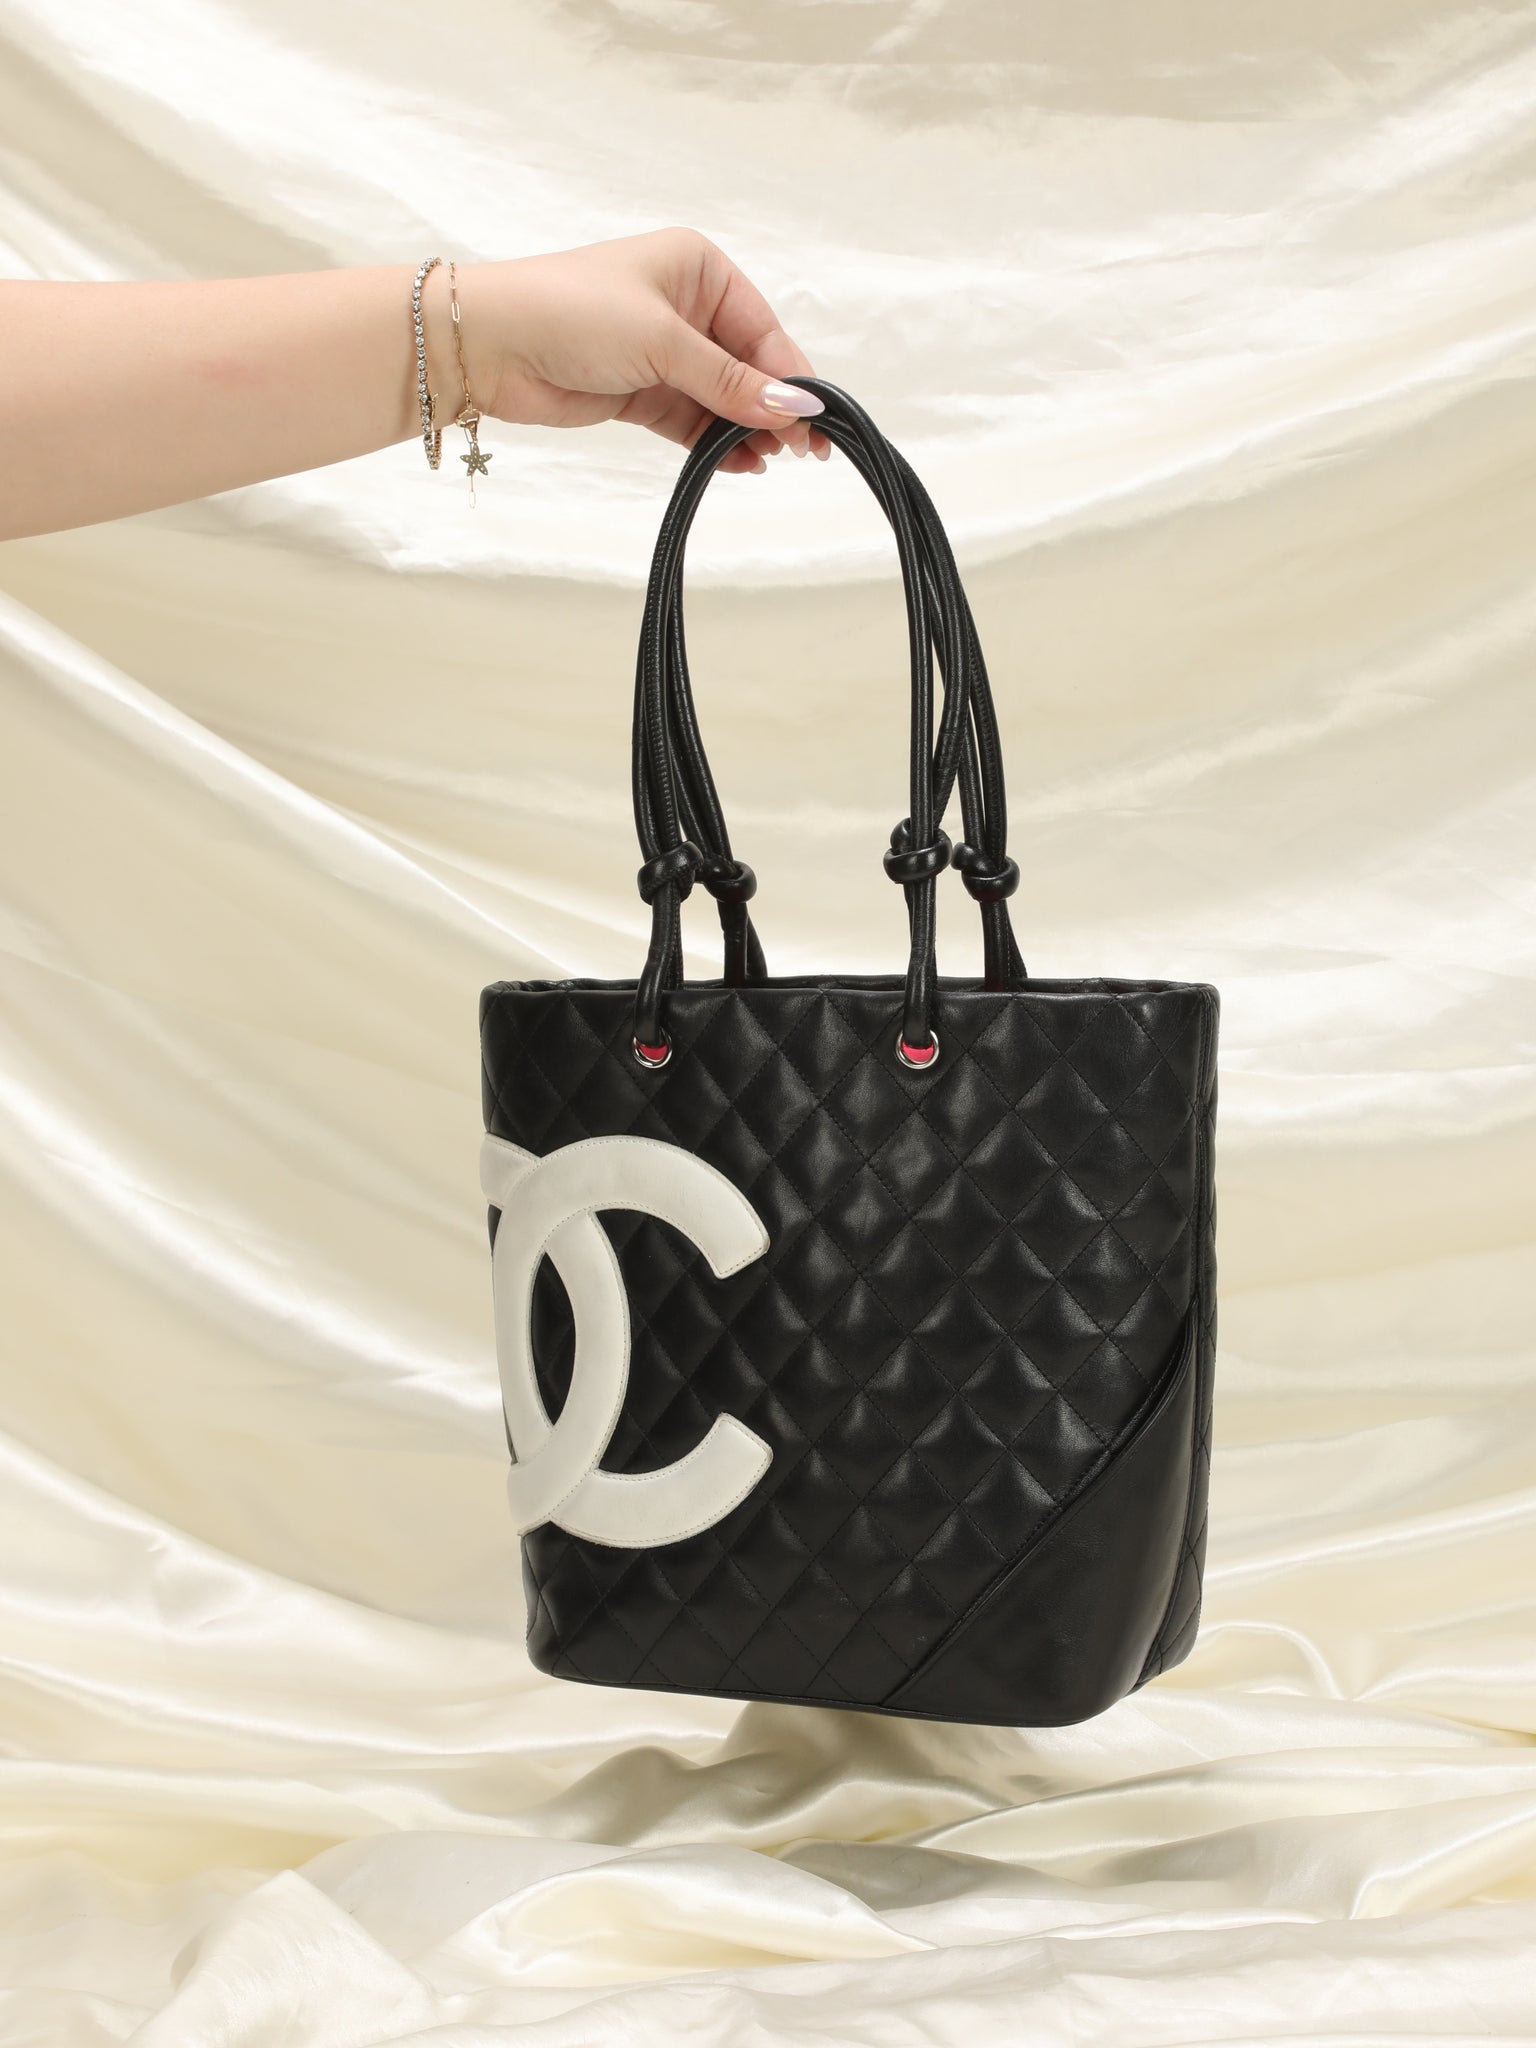 CHANEL Black and White Lambskin Mini Shopping Bag Tote For Sale at